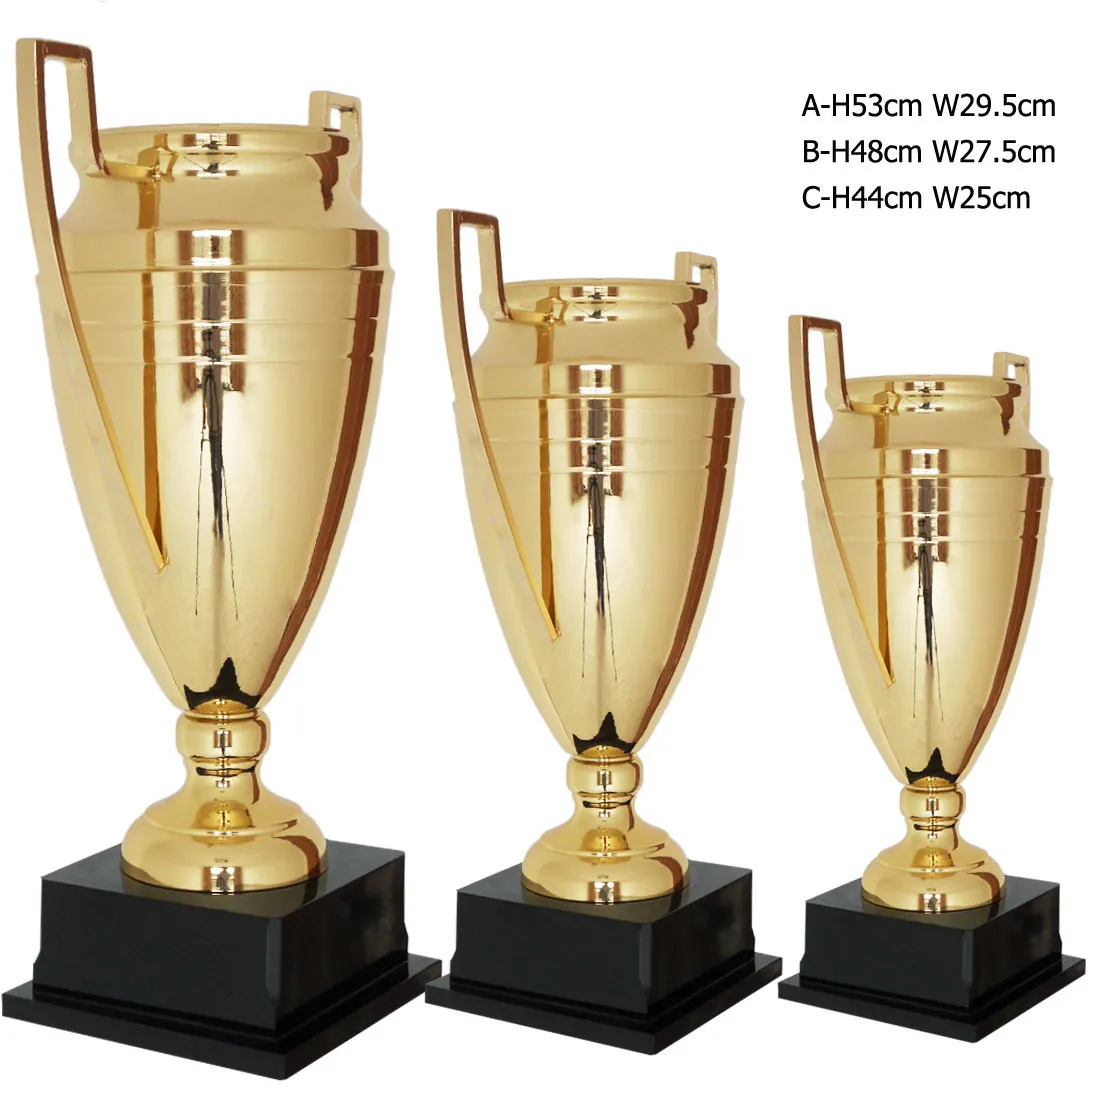 Custom Luxury big world soccer cup trophy Competition alloy Metal sport Gold World Sports football Cup Trophy Trophies and Medal